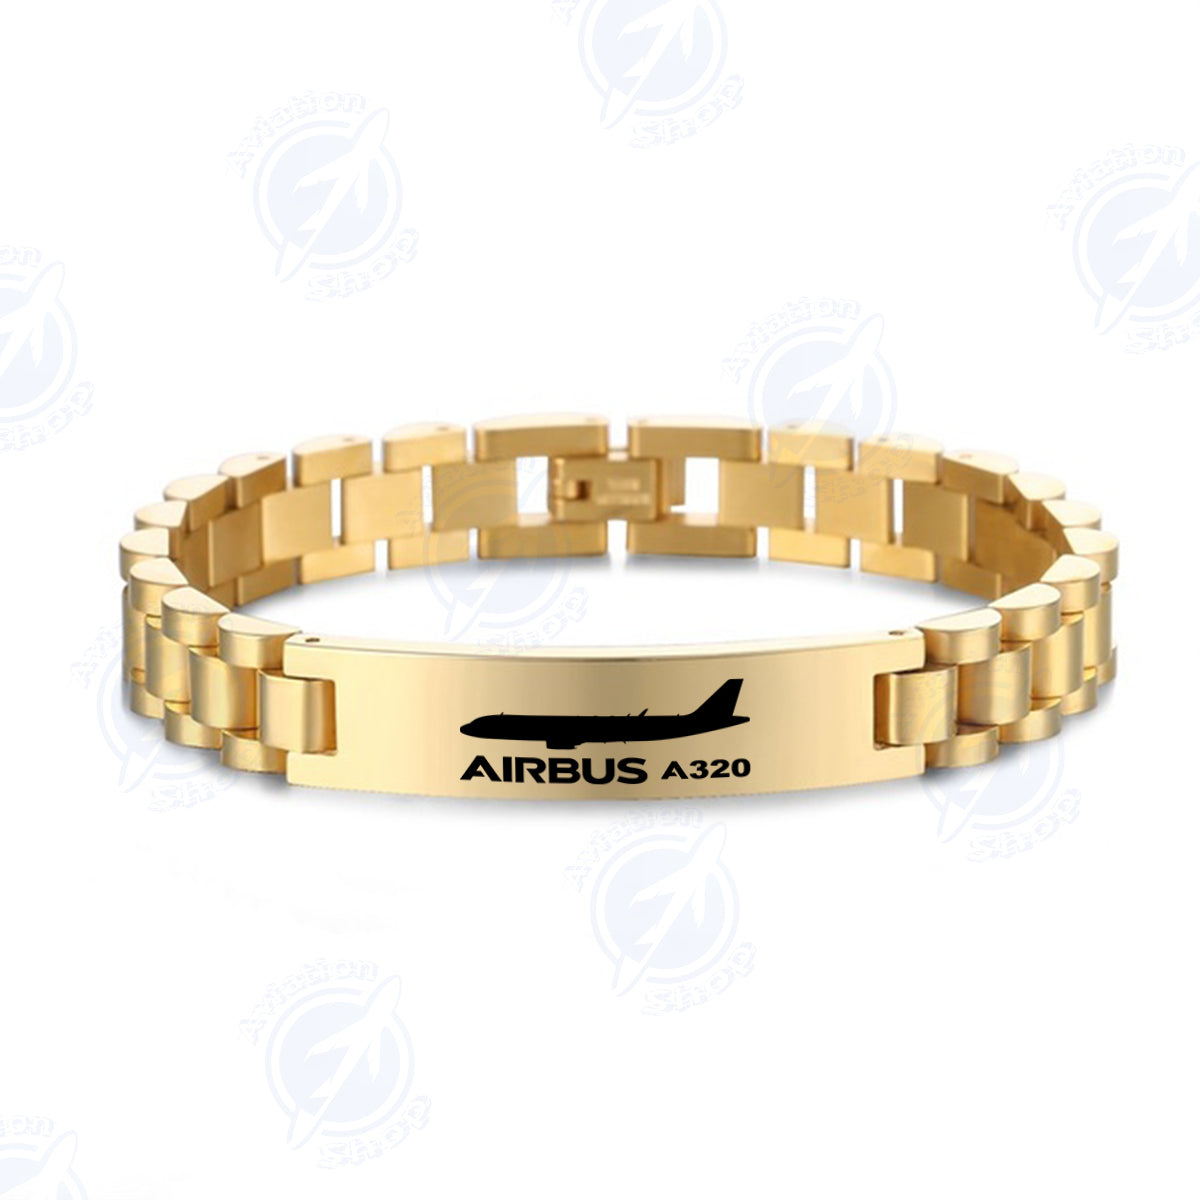 The Airbus A320 Designed Stainless Steel Chain Bracelets